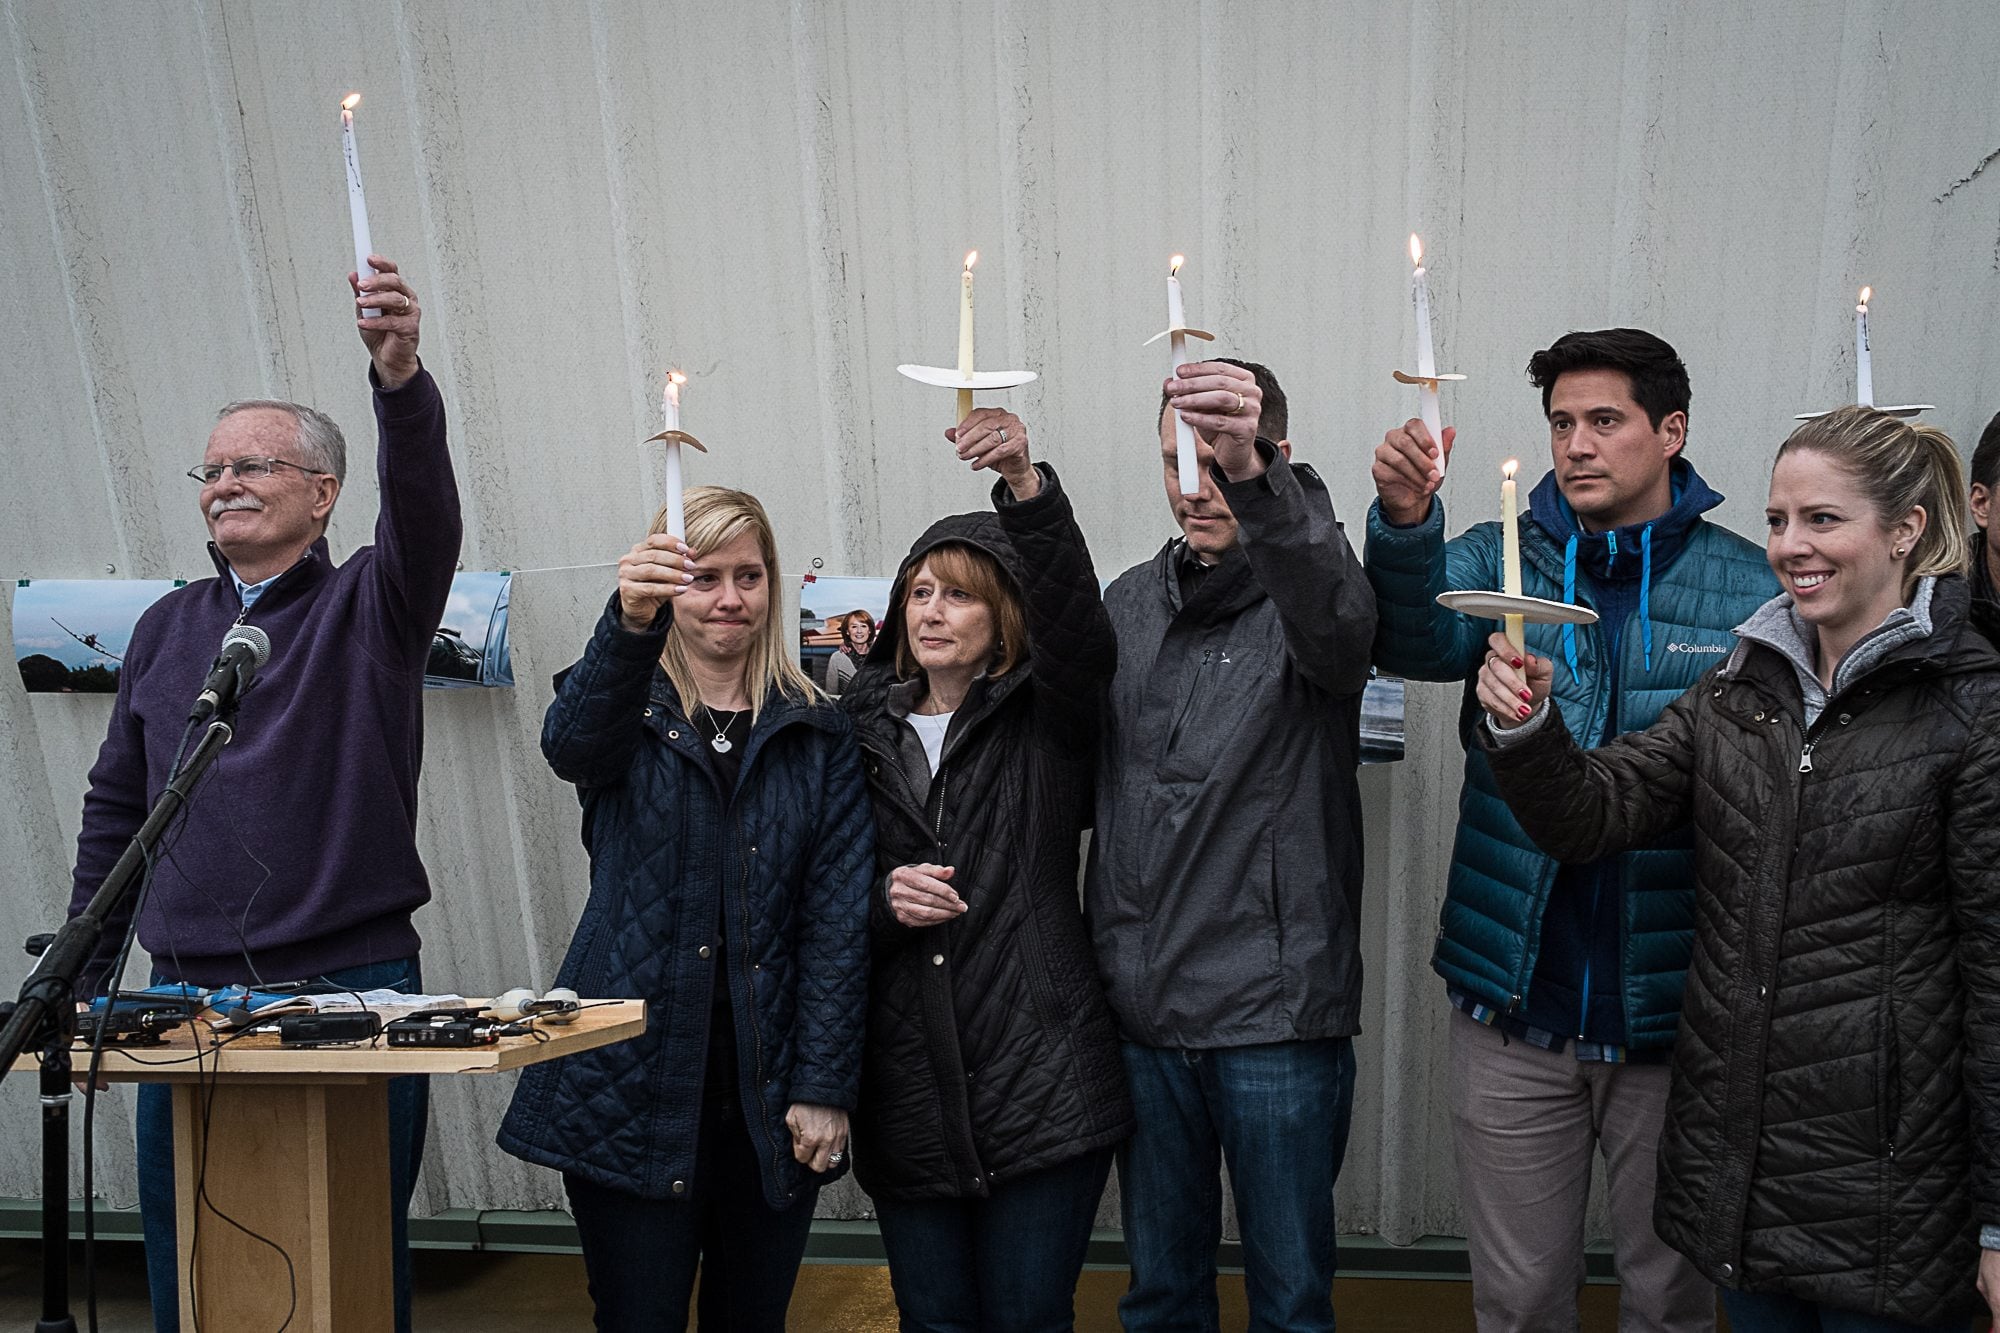 John McKibbin's family and the Rev. Fitz Neal, left, hold up candles in remembrance of McKibbin's life at a vigil Saturday evening at Pearson Field in Vancouver.